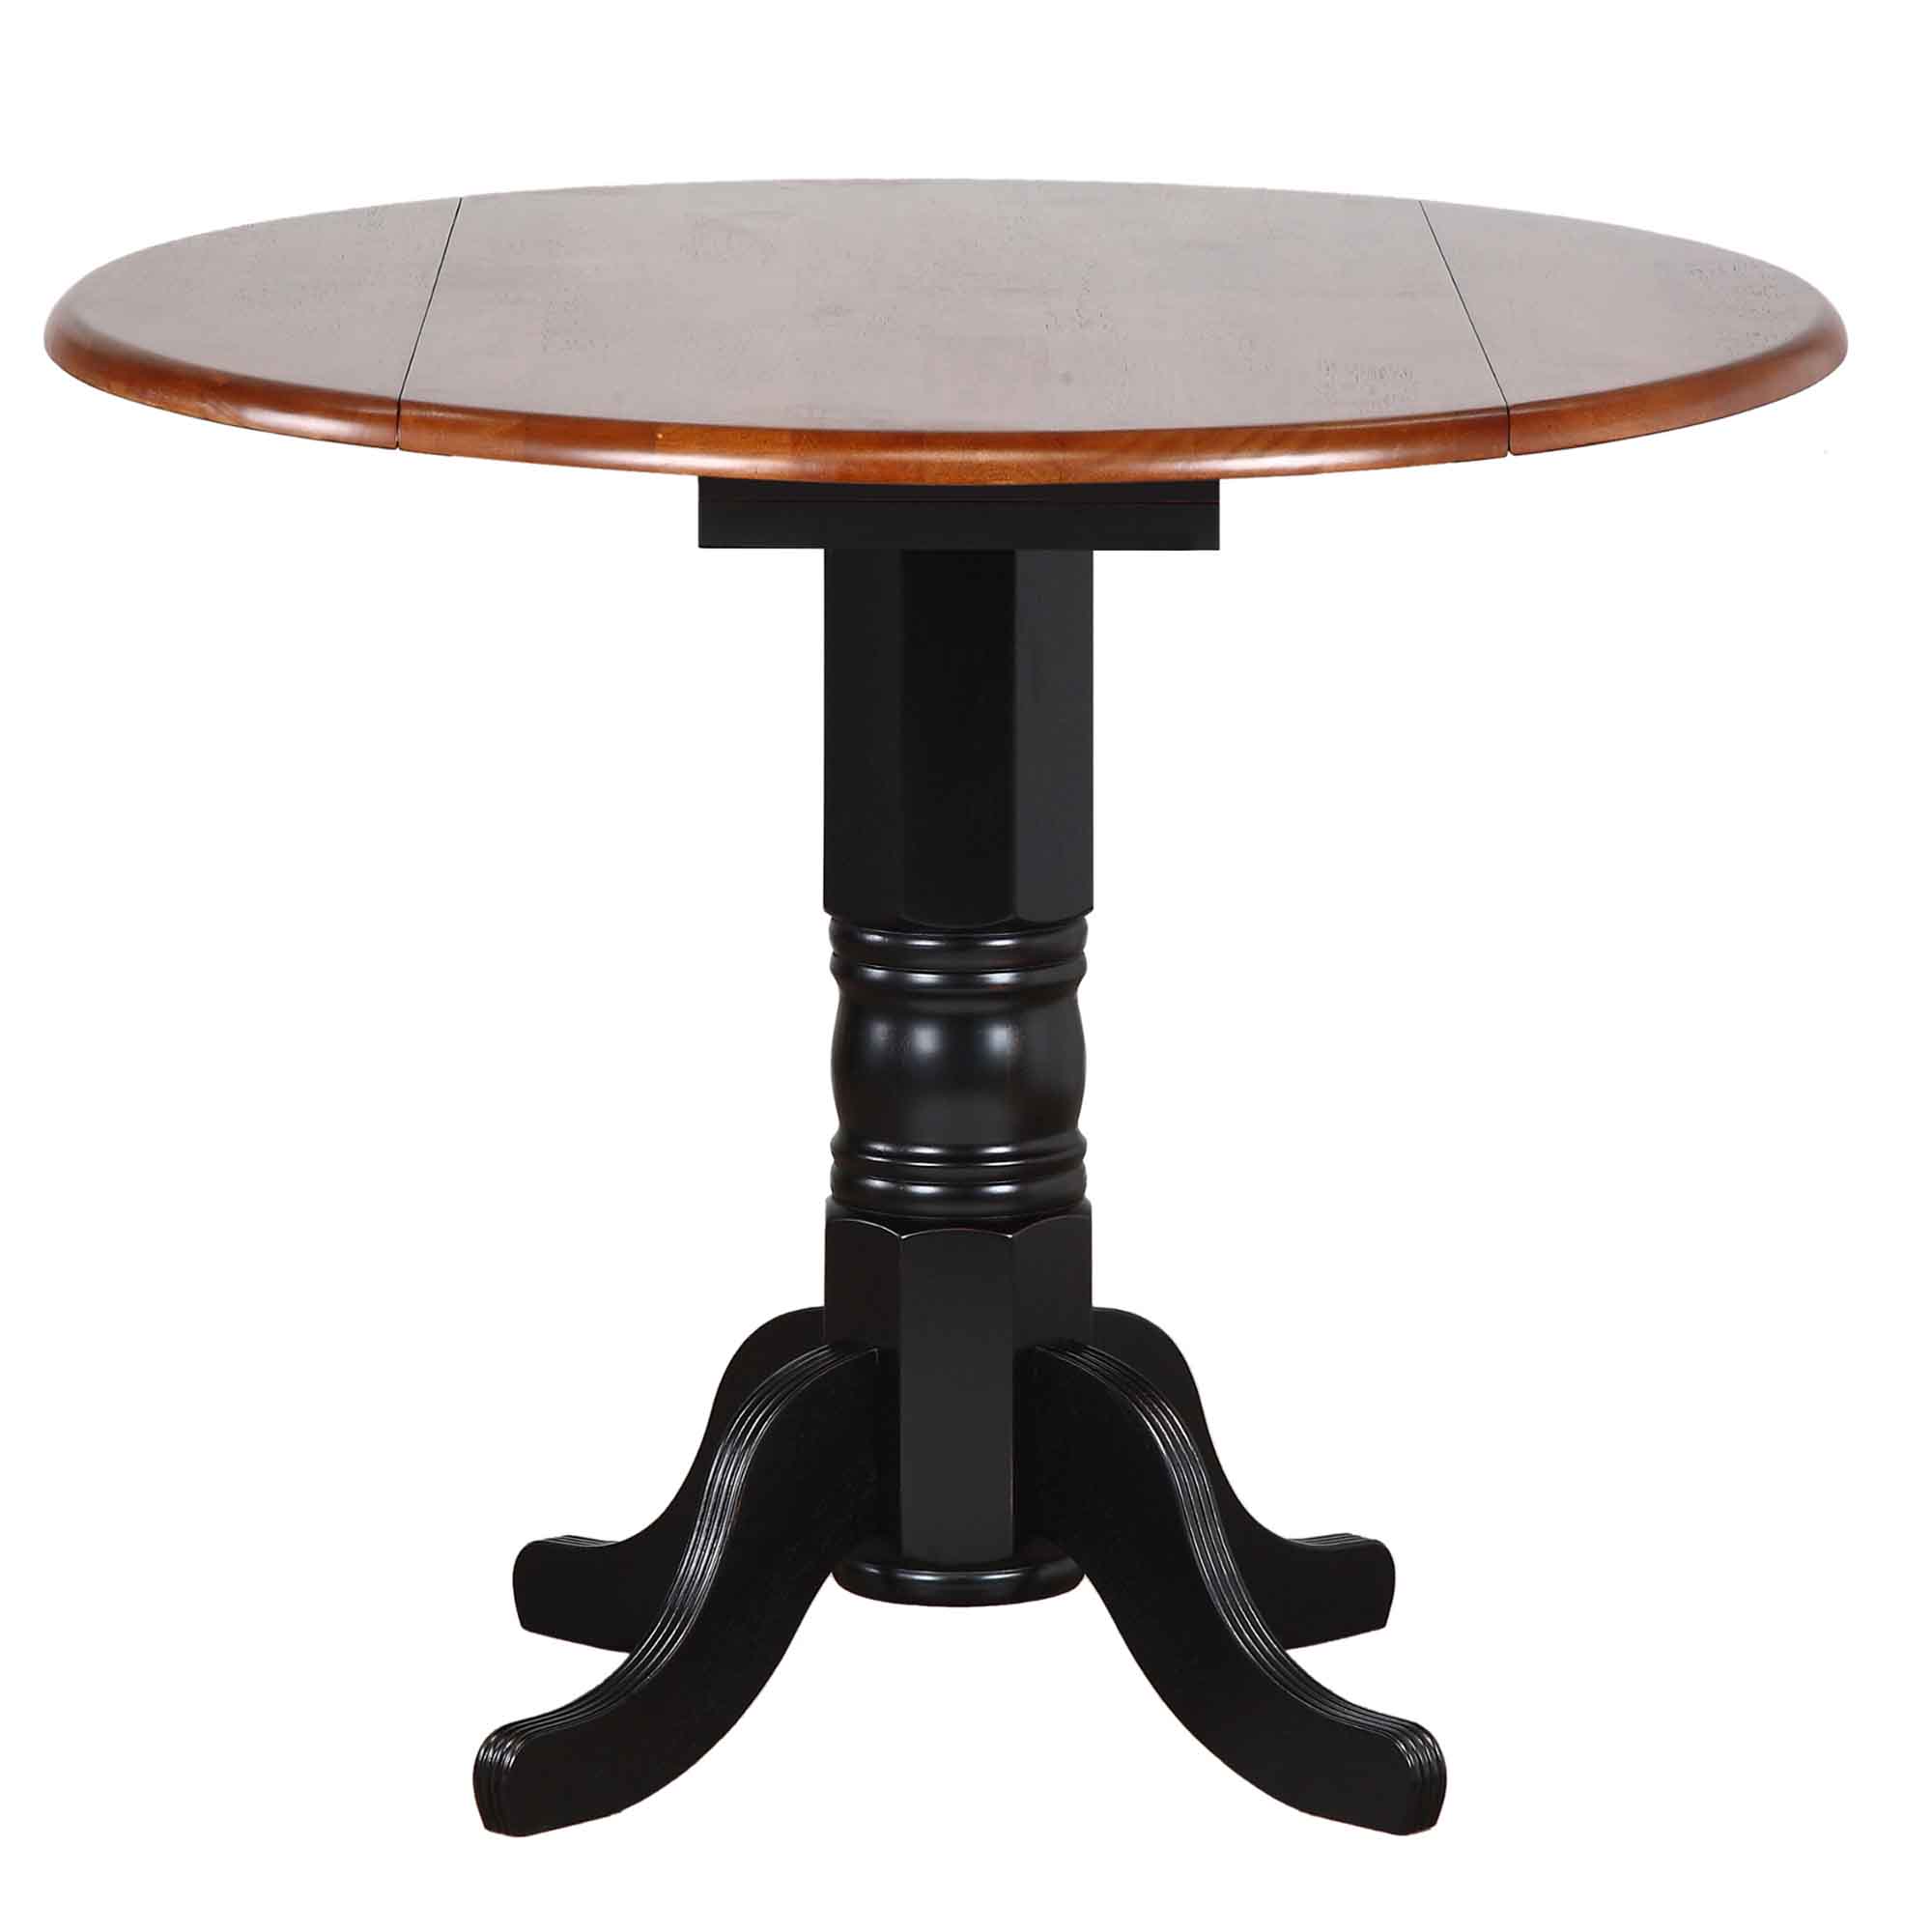 Round Drop Leaf Pub Table Antique Black With Cherry Finish Sunset